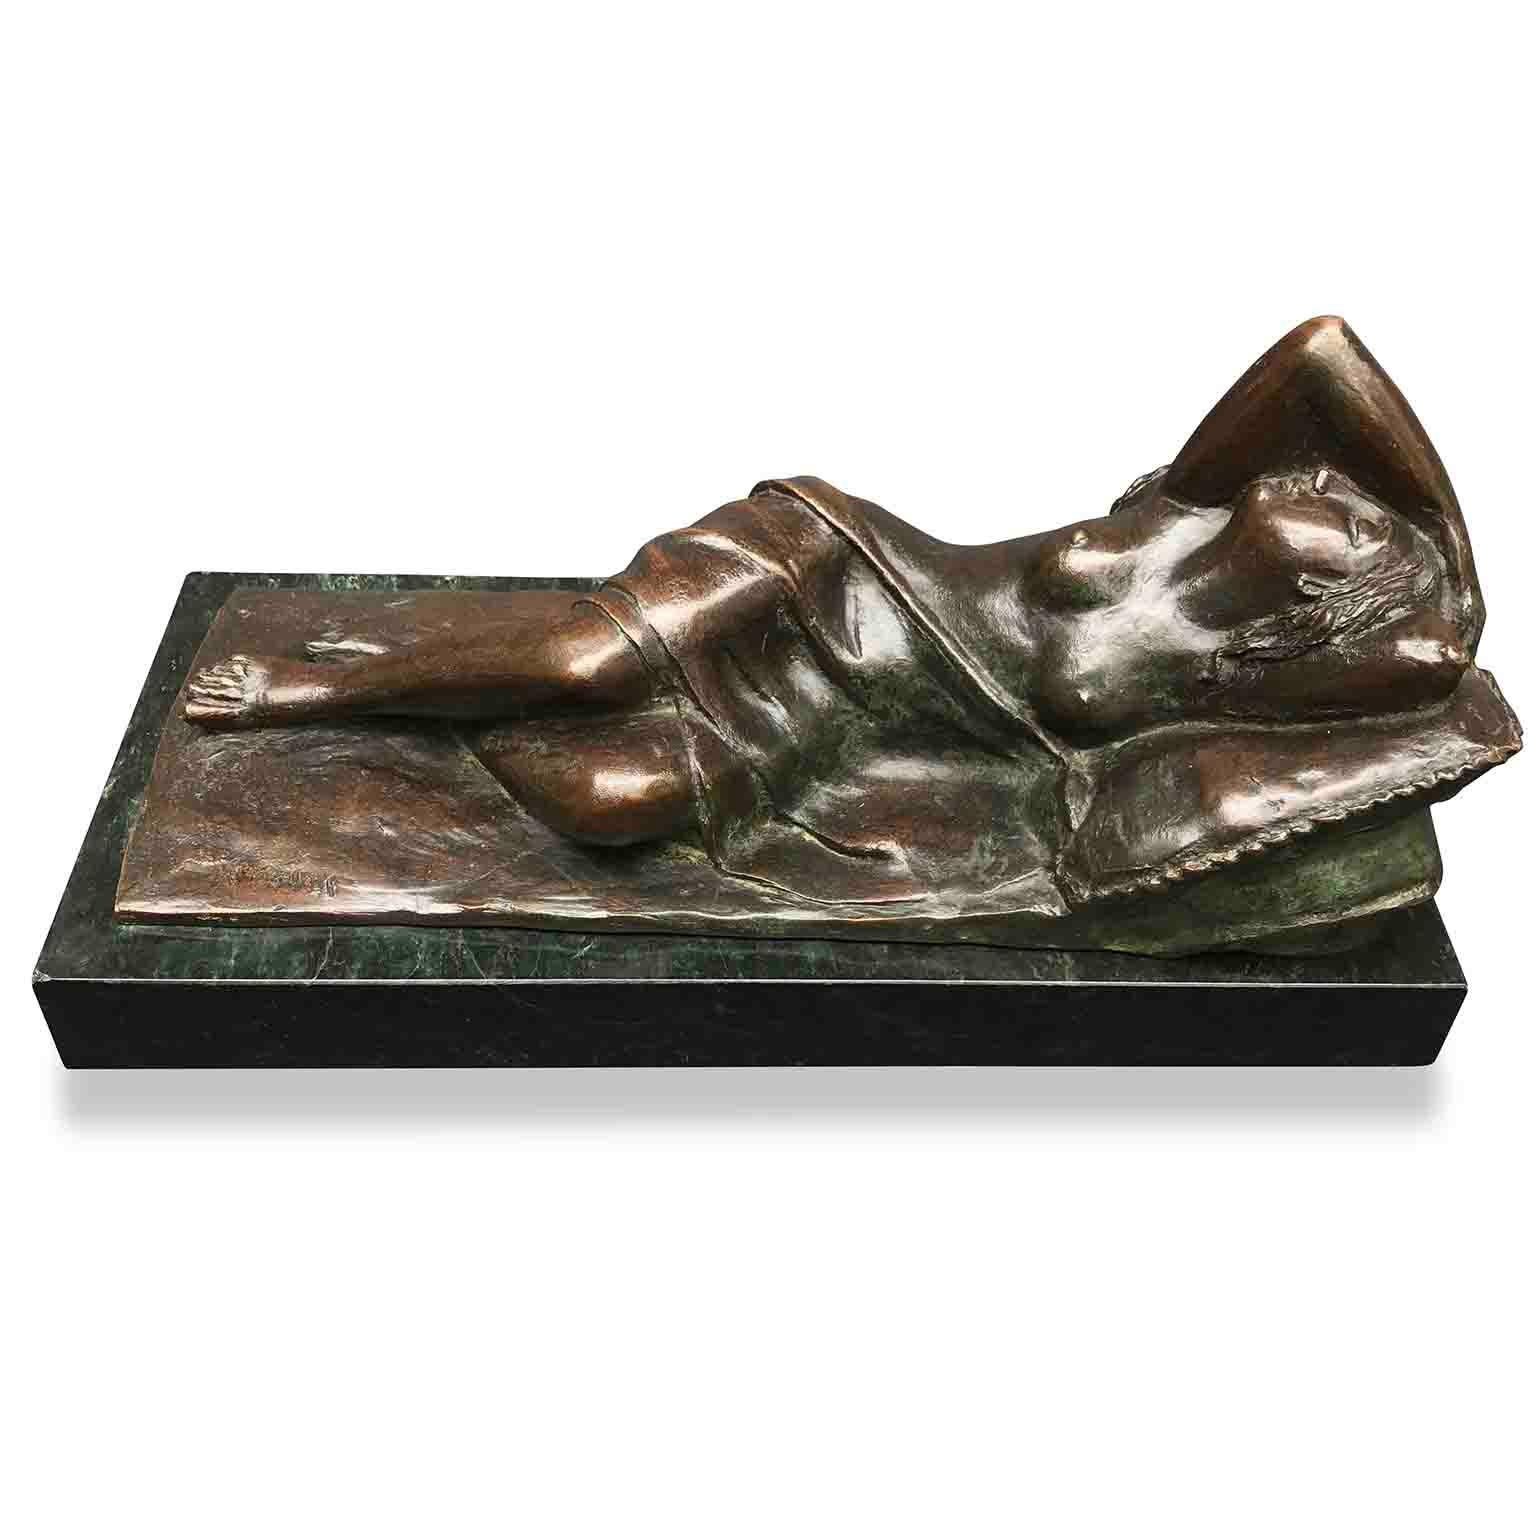 A dark bronze casting sleeping Venus figure, awakening and lying on a soft cushion. The bronze sculpture is signed lower left E Sala, the Italian Milanese sculptor and painter Eliseo Sala (Milan 1813-1879).

This bronze sculpture is in good